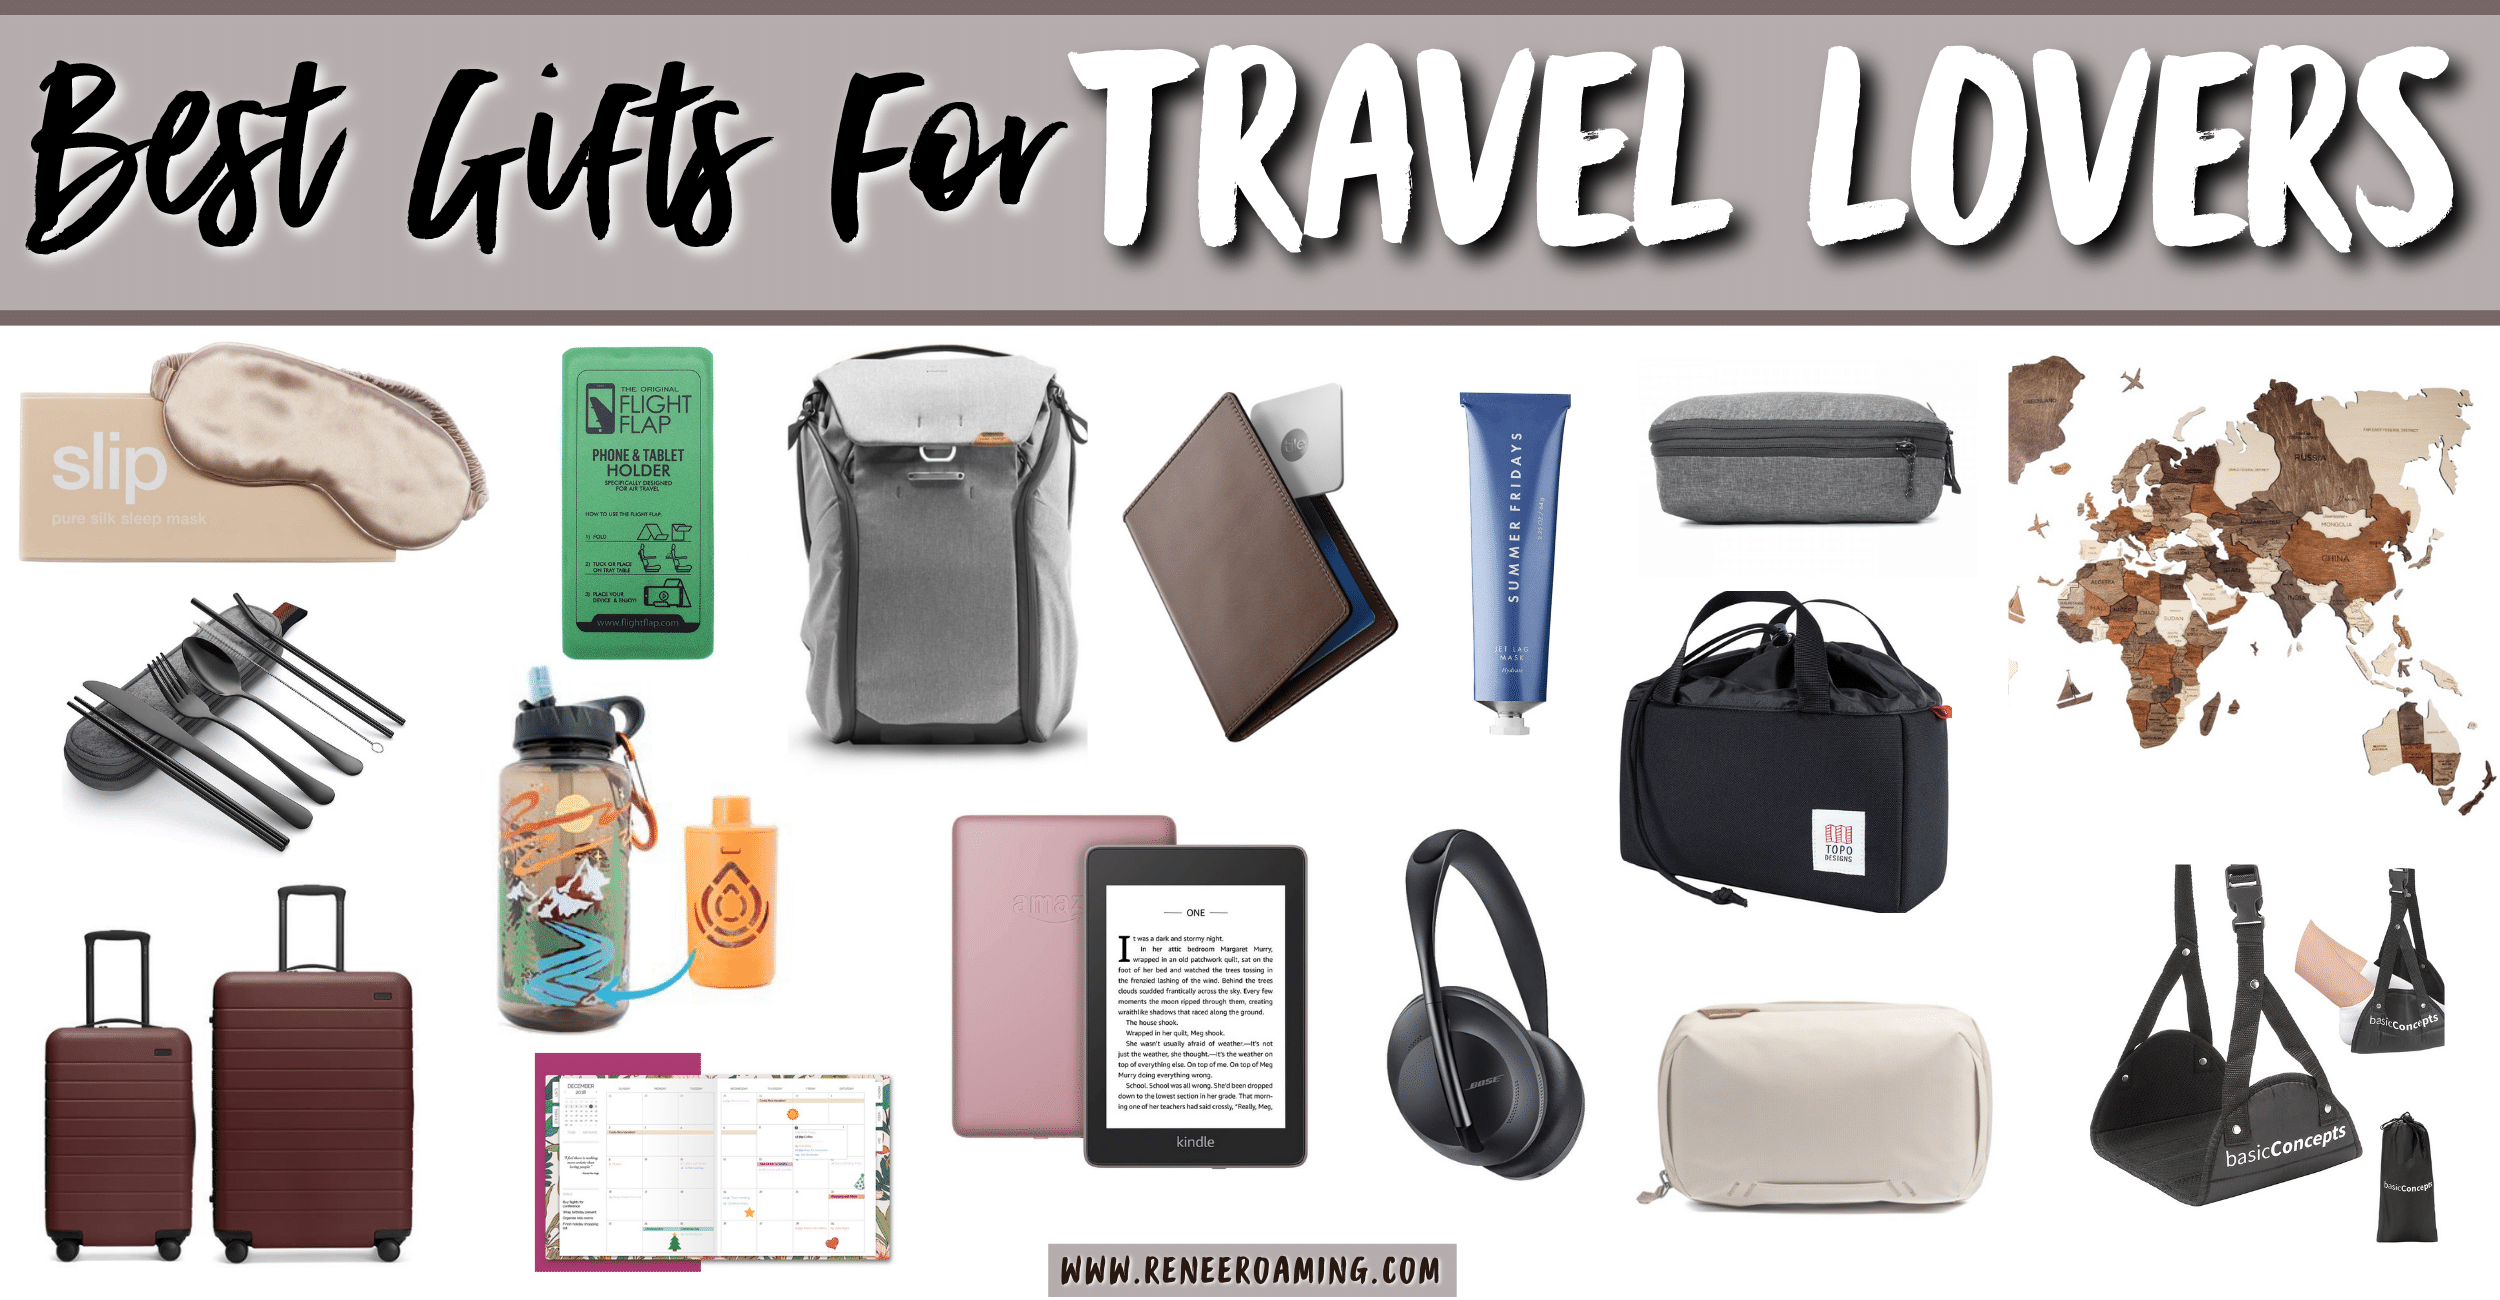 Best Gifts for Travel Lovers - Renee Roaming